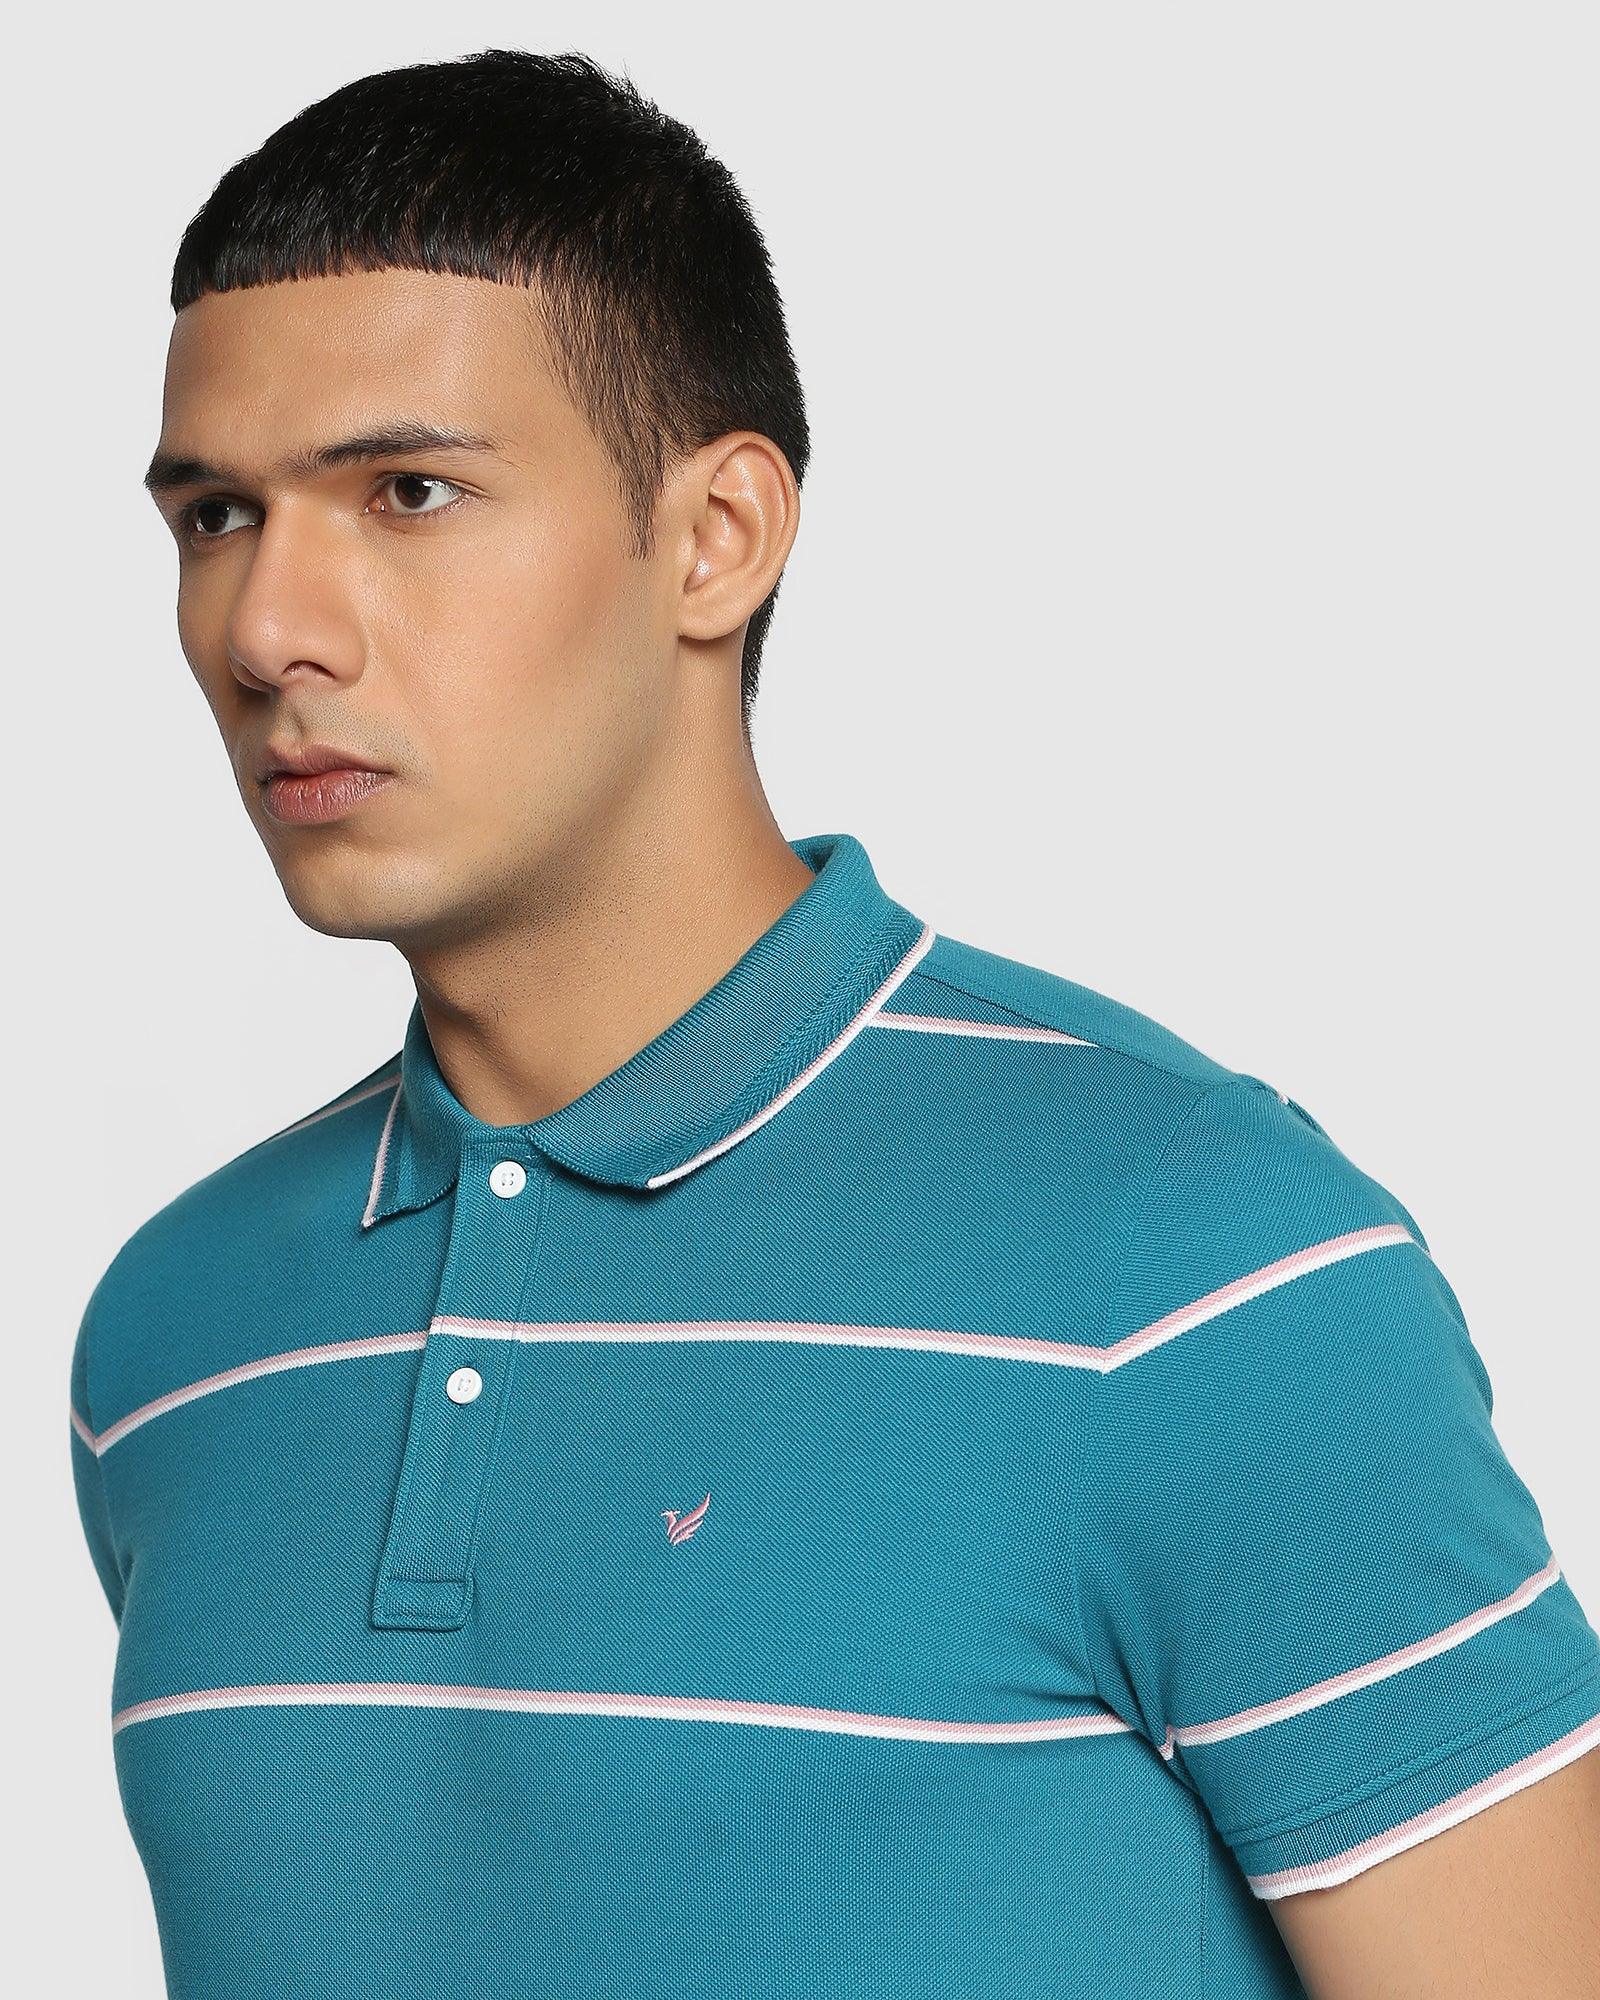 Polo Electric Blue Striped T Shirt - Vertical